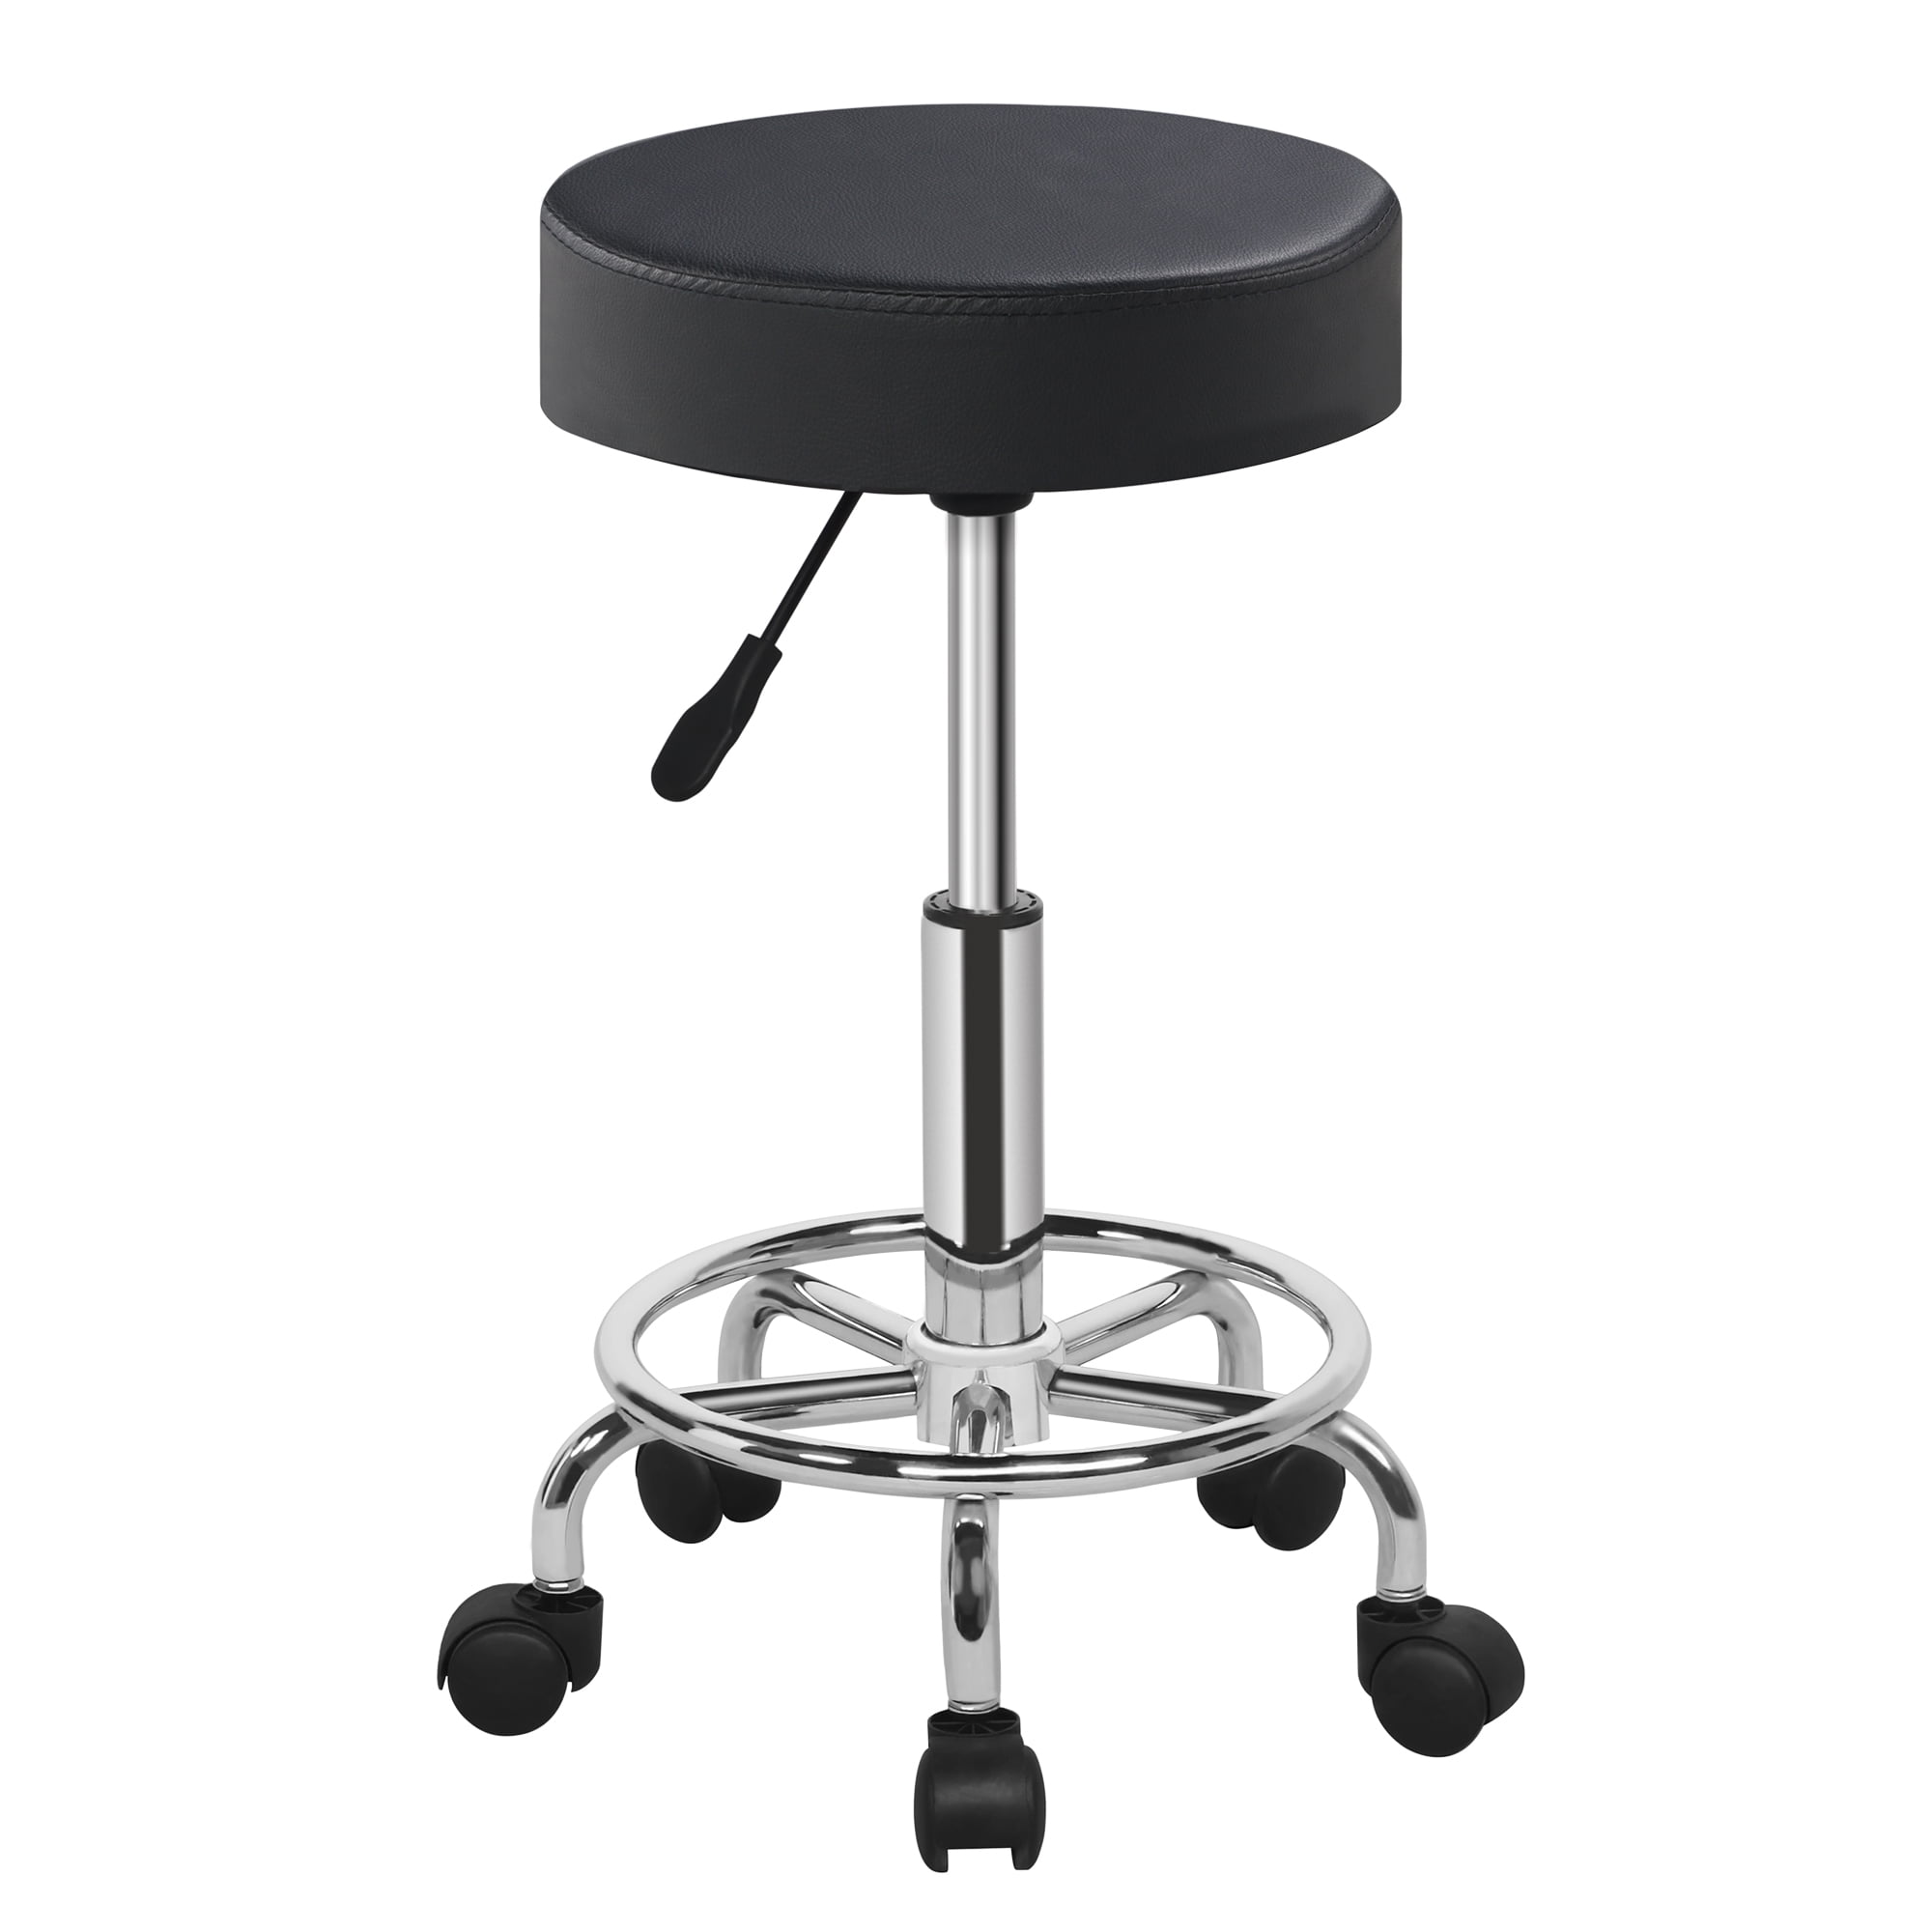 Workshop Stool Swivel Stool Workshop Stool Mobile with gas spring and Tray 